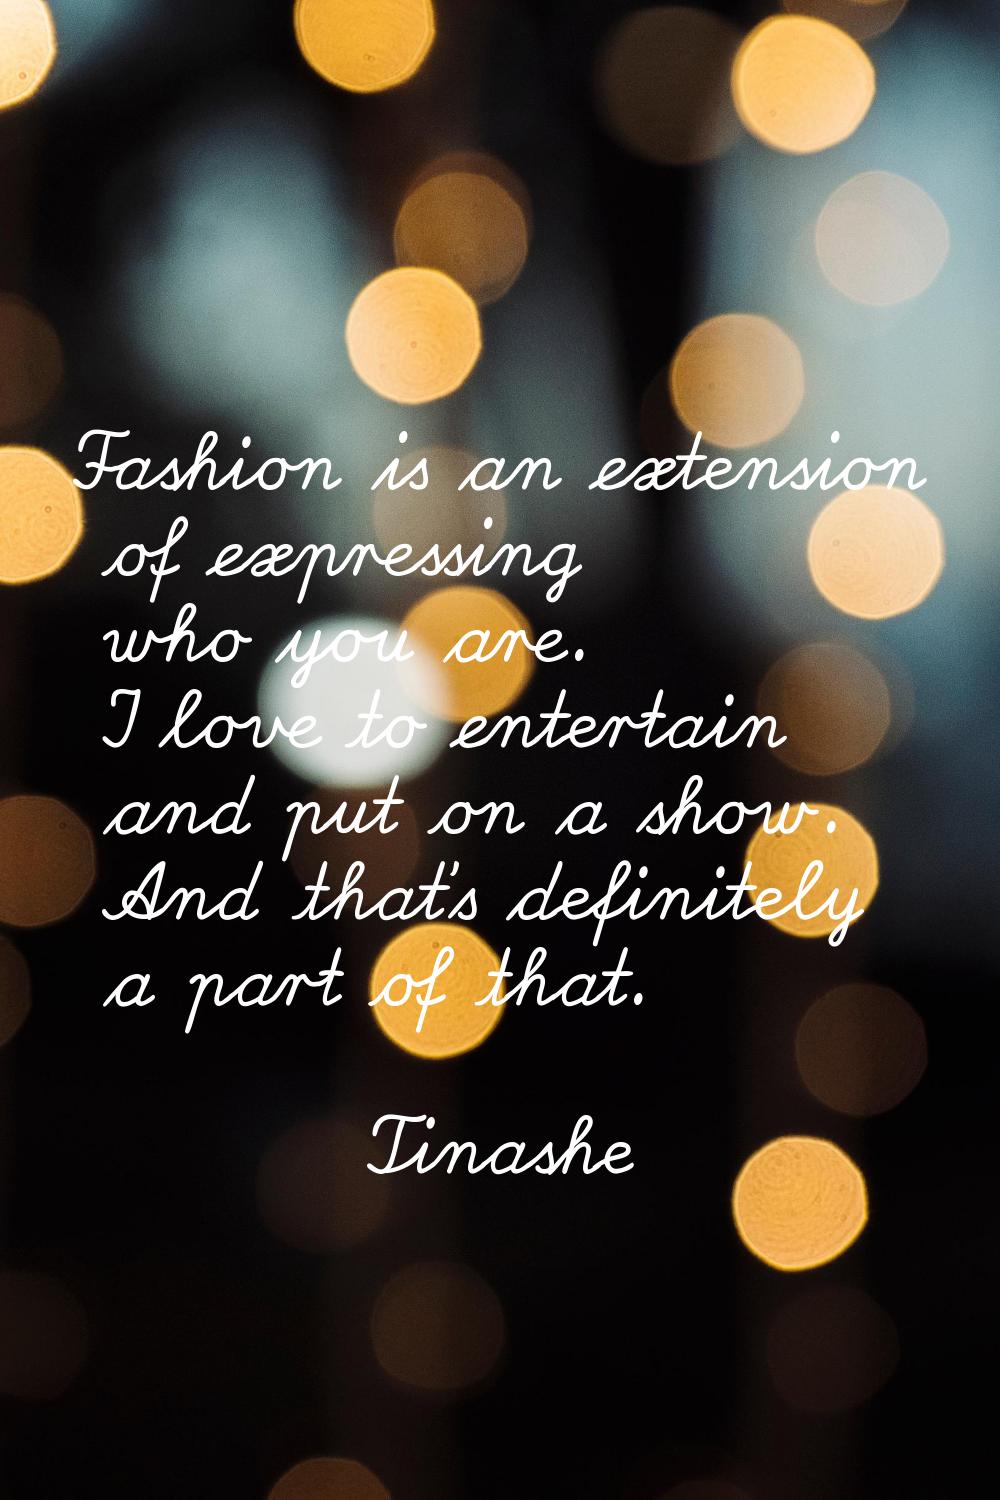 Fashion is an extension of expressing who you are. I love to entertain and put on a show. And that'